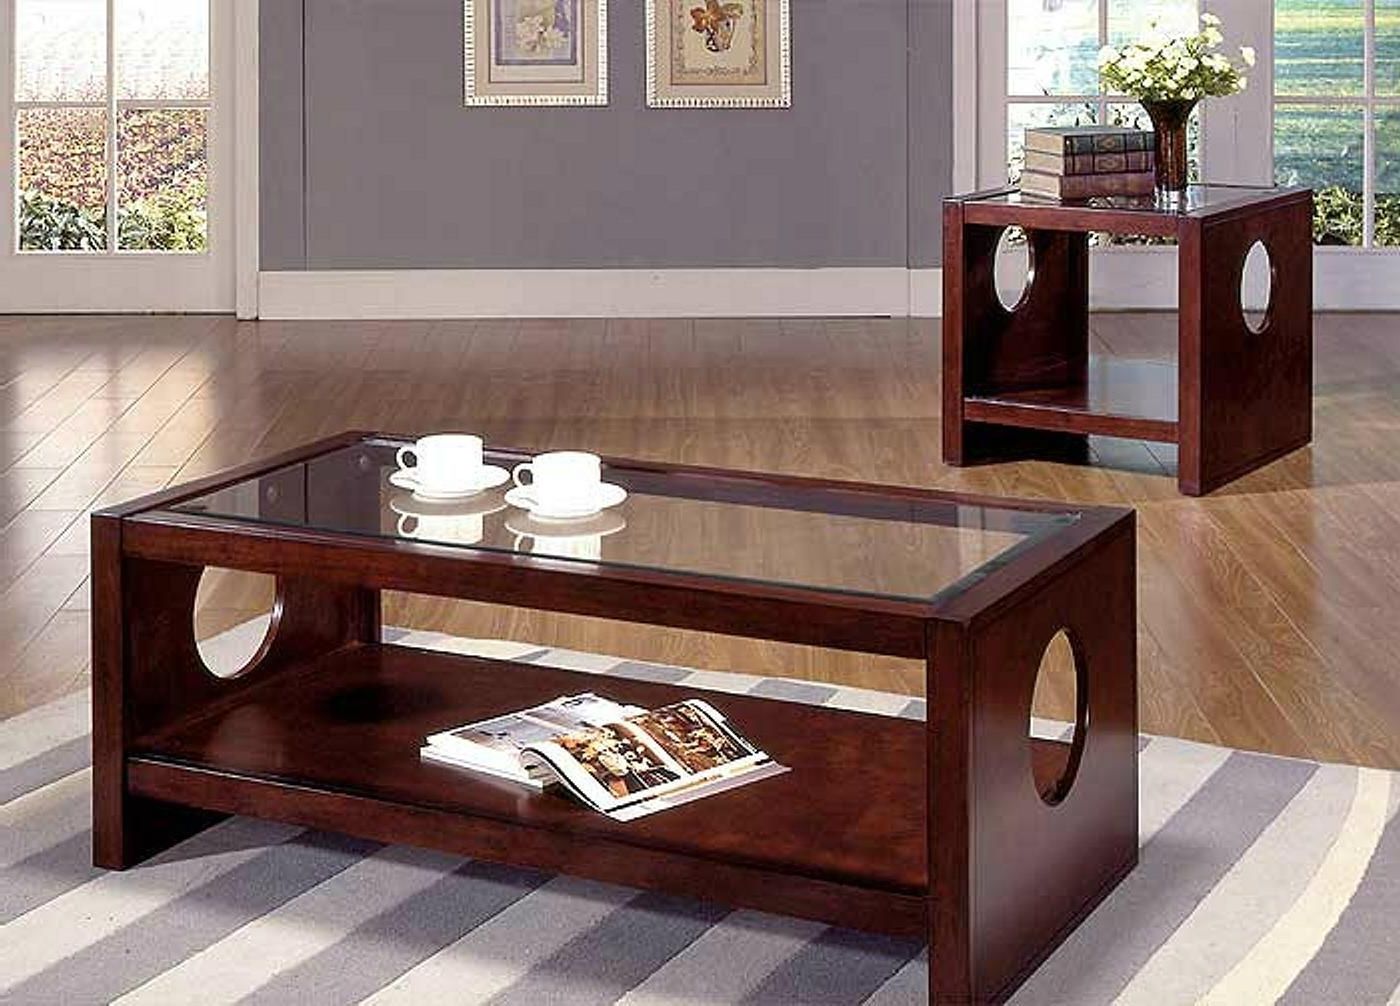 2pcs Wooden Mahogany Hollow Core Panel Glass Top Coffee In Fashionable Espresso Wood And Glass Top Coffee Tables (View 5 of 20)